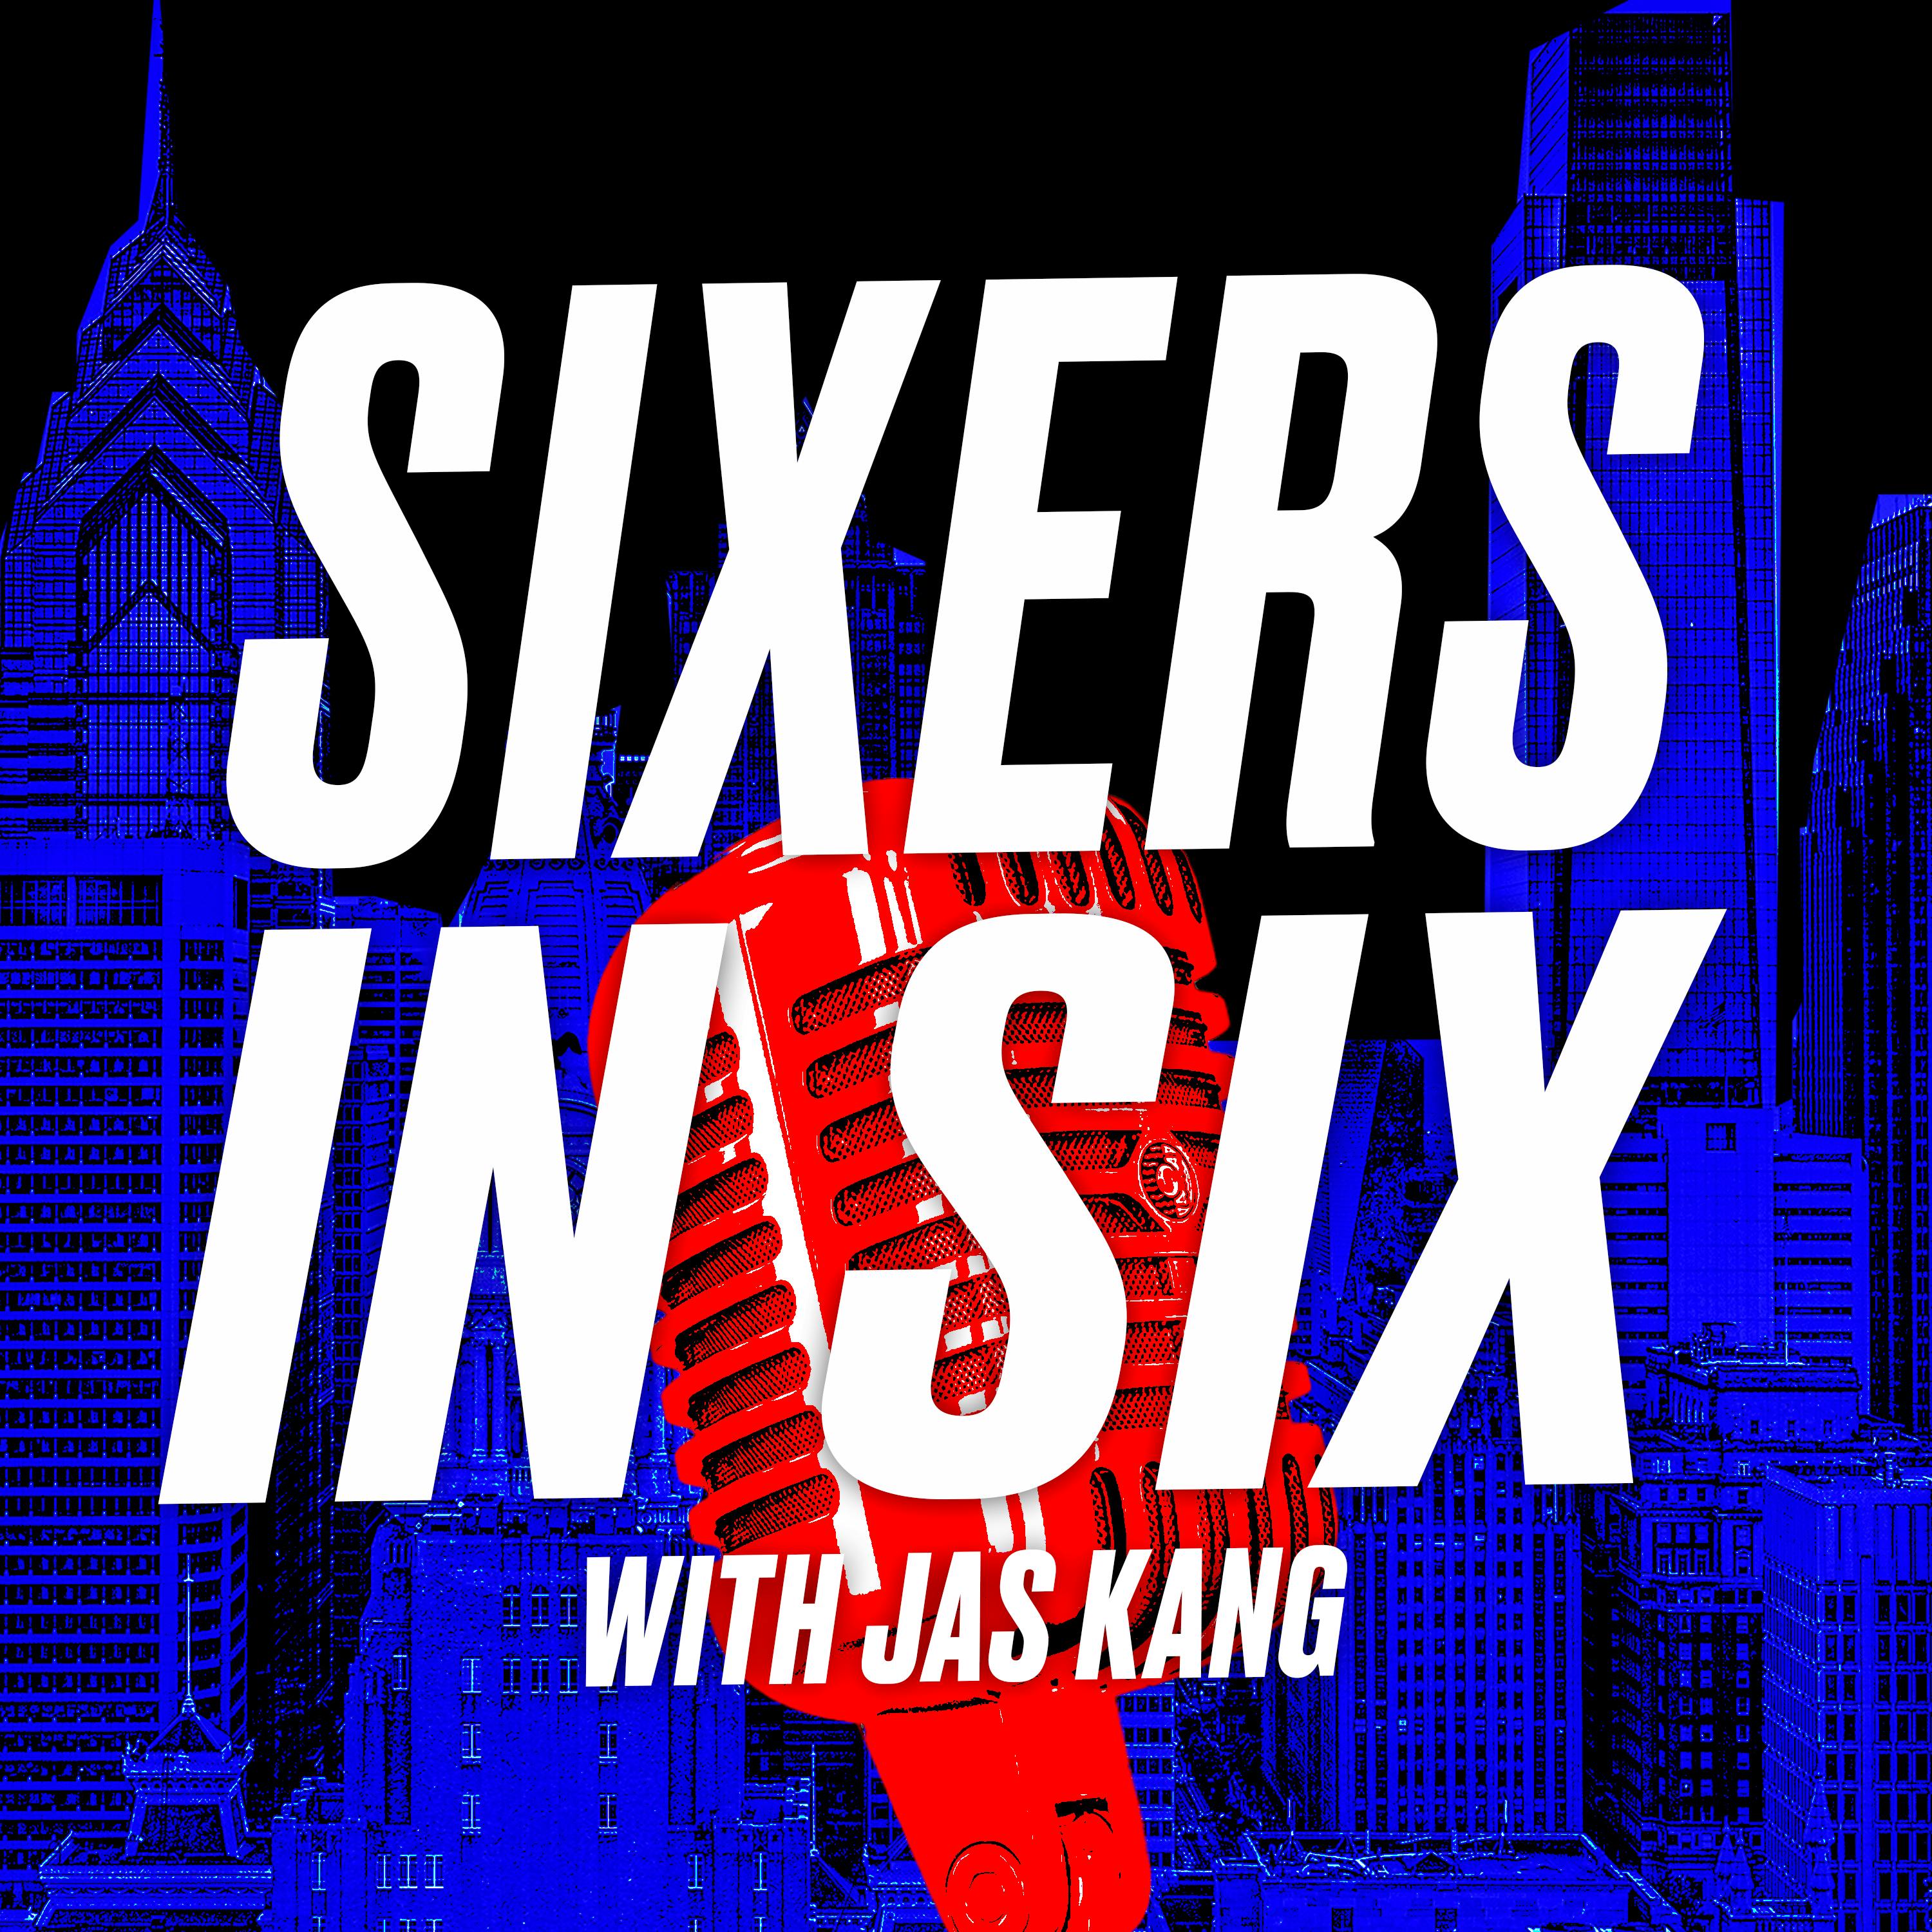 Sixers Daily with Jas Kang - Philly loses an ugly outing to the San Antonio Spurs. If this continues, how long before Doc Rivers is fired?